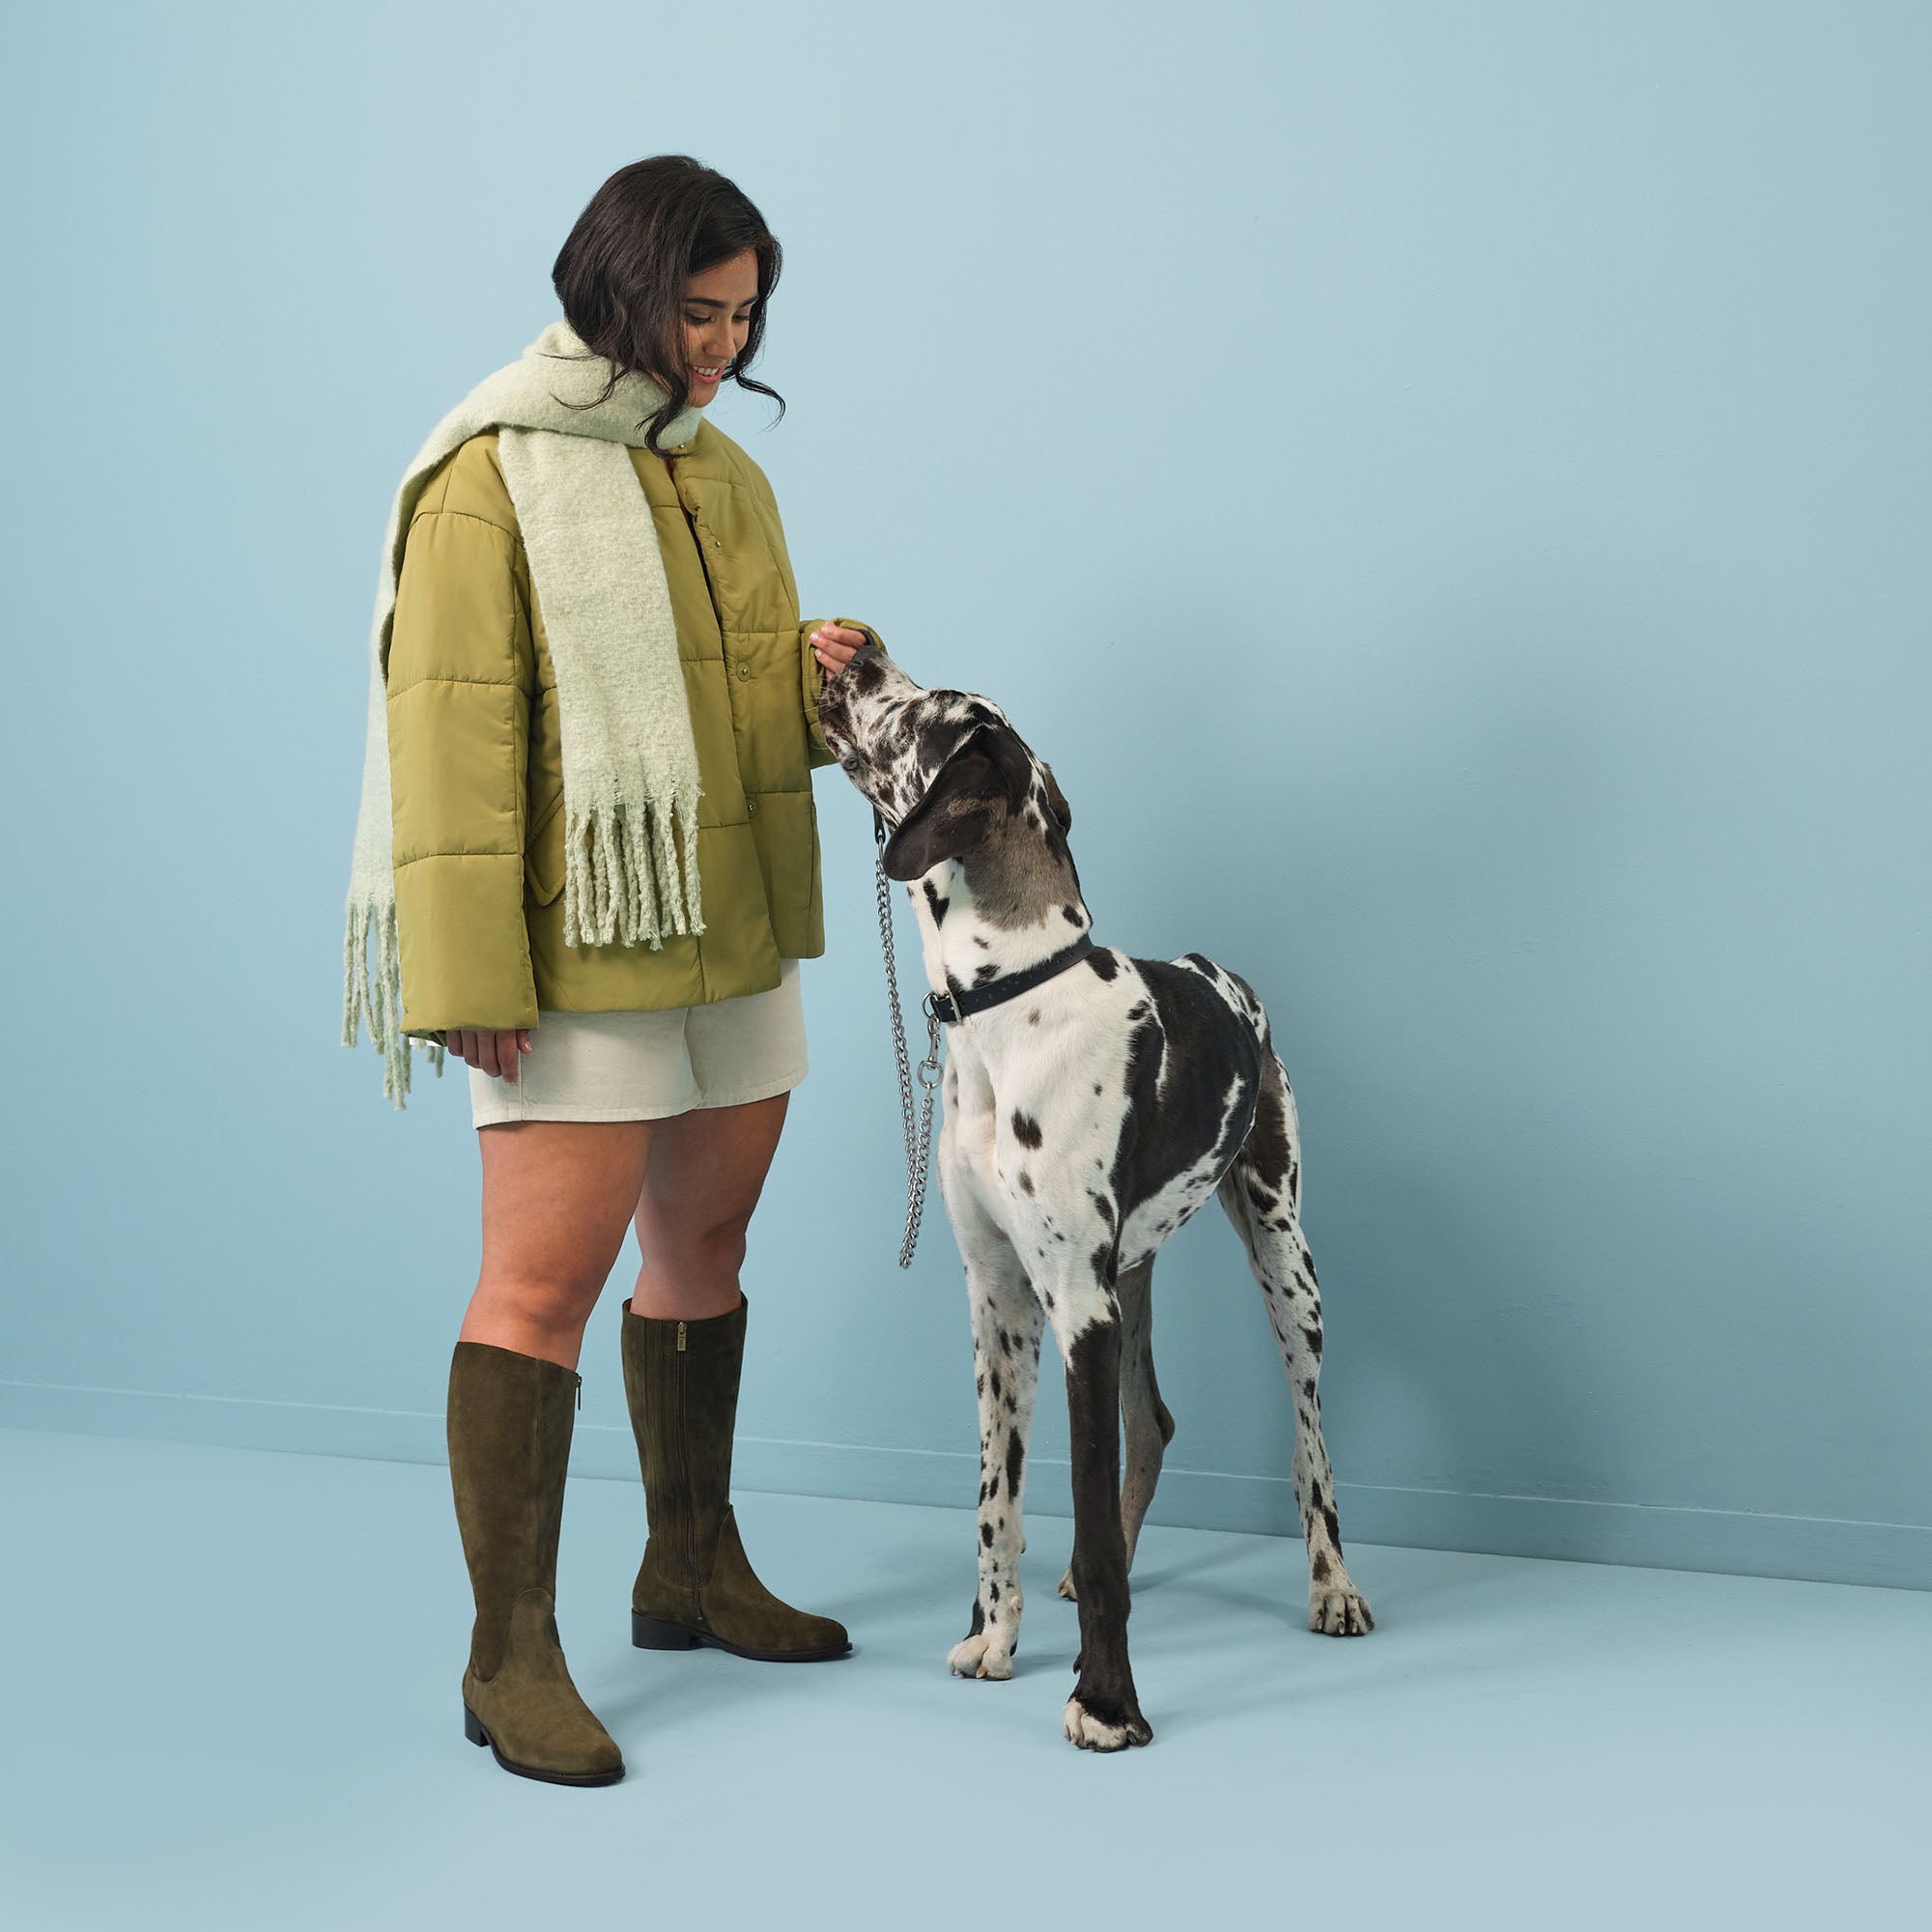 woman wearing wide calf forest green suede boots standing next to a dog